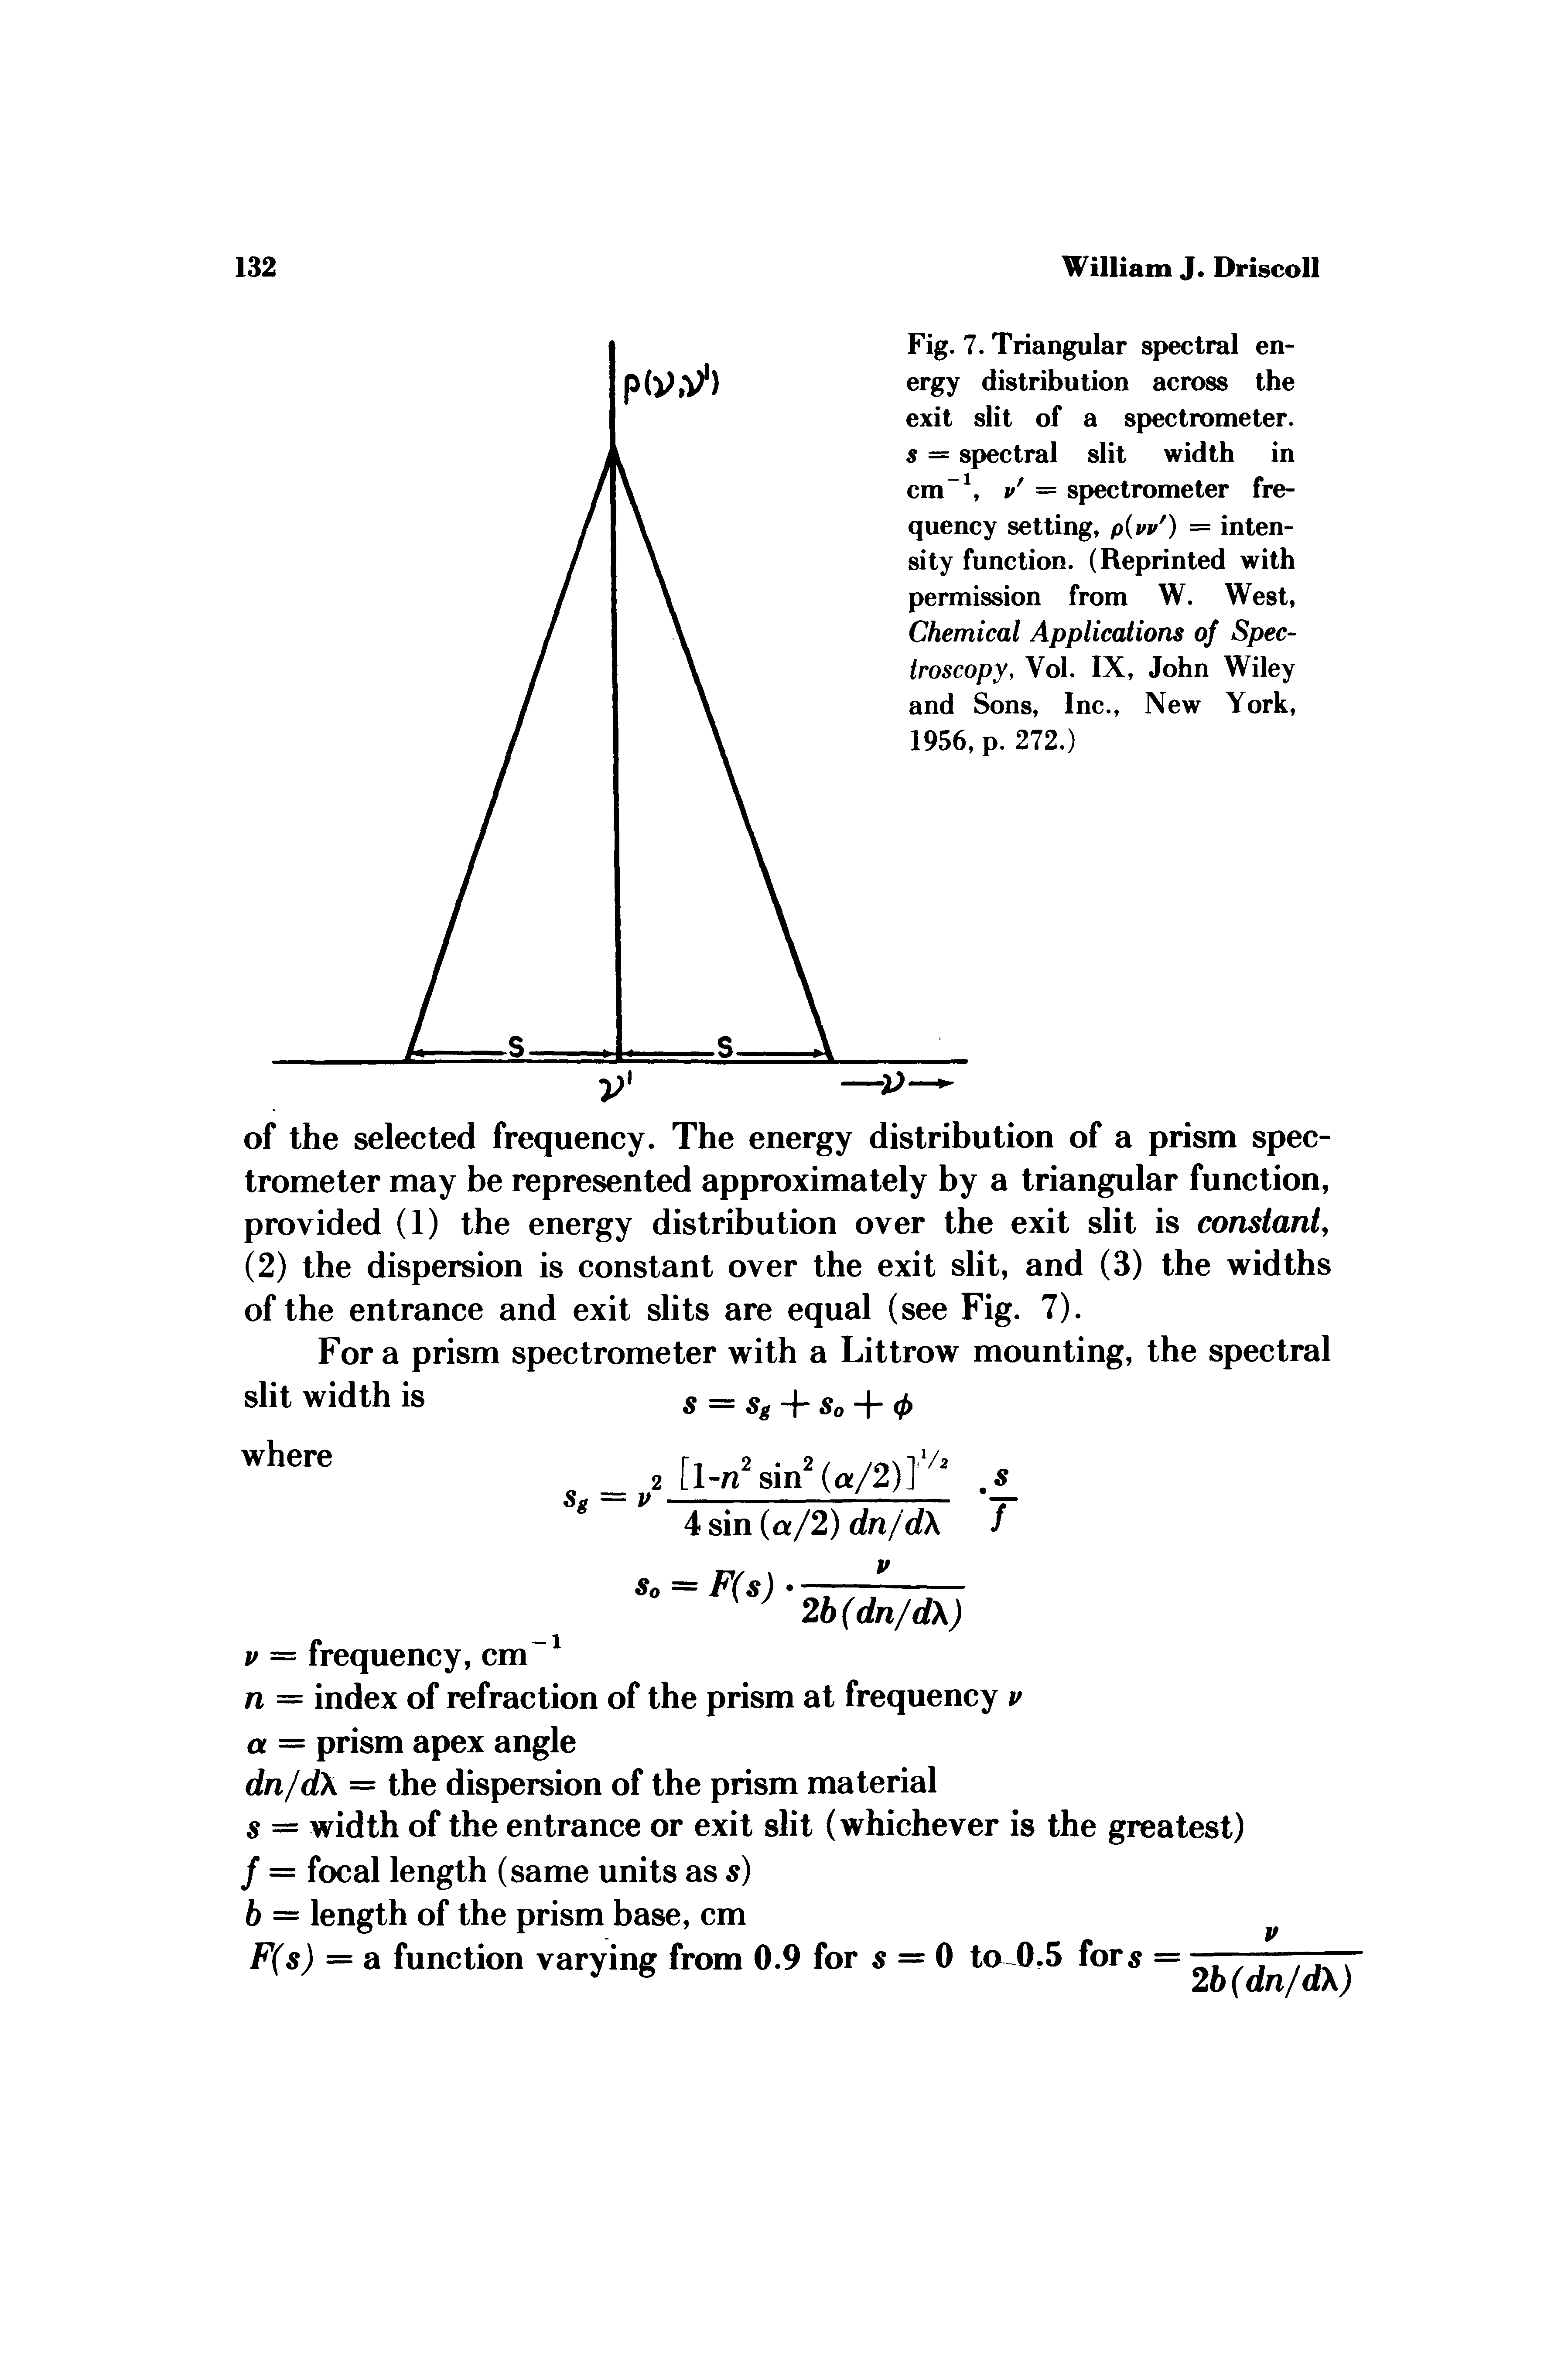 Fig. 7. Triangular spectral energy distribution across the exit slit of a spectrometer. s = spectral slit width in cm = spectrometer frequency setting, p(w ) = intensity function. (Reprinted with permission from W. West, Chemical Applicaiions of Spectroscopy, Vol. IX, John Wiley and Sons, Inc., New York, 1956, p. 272.)...